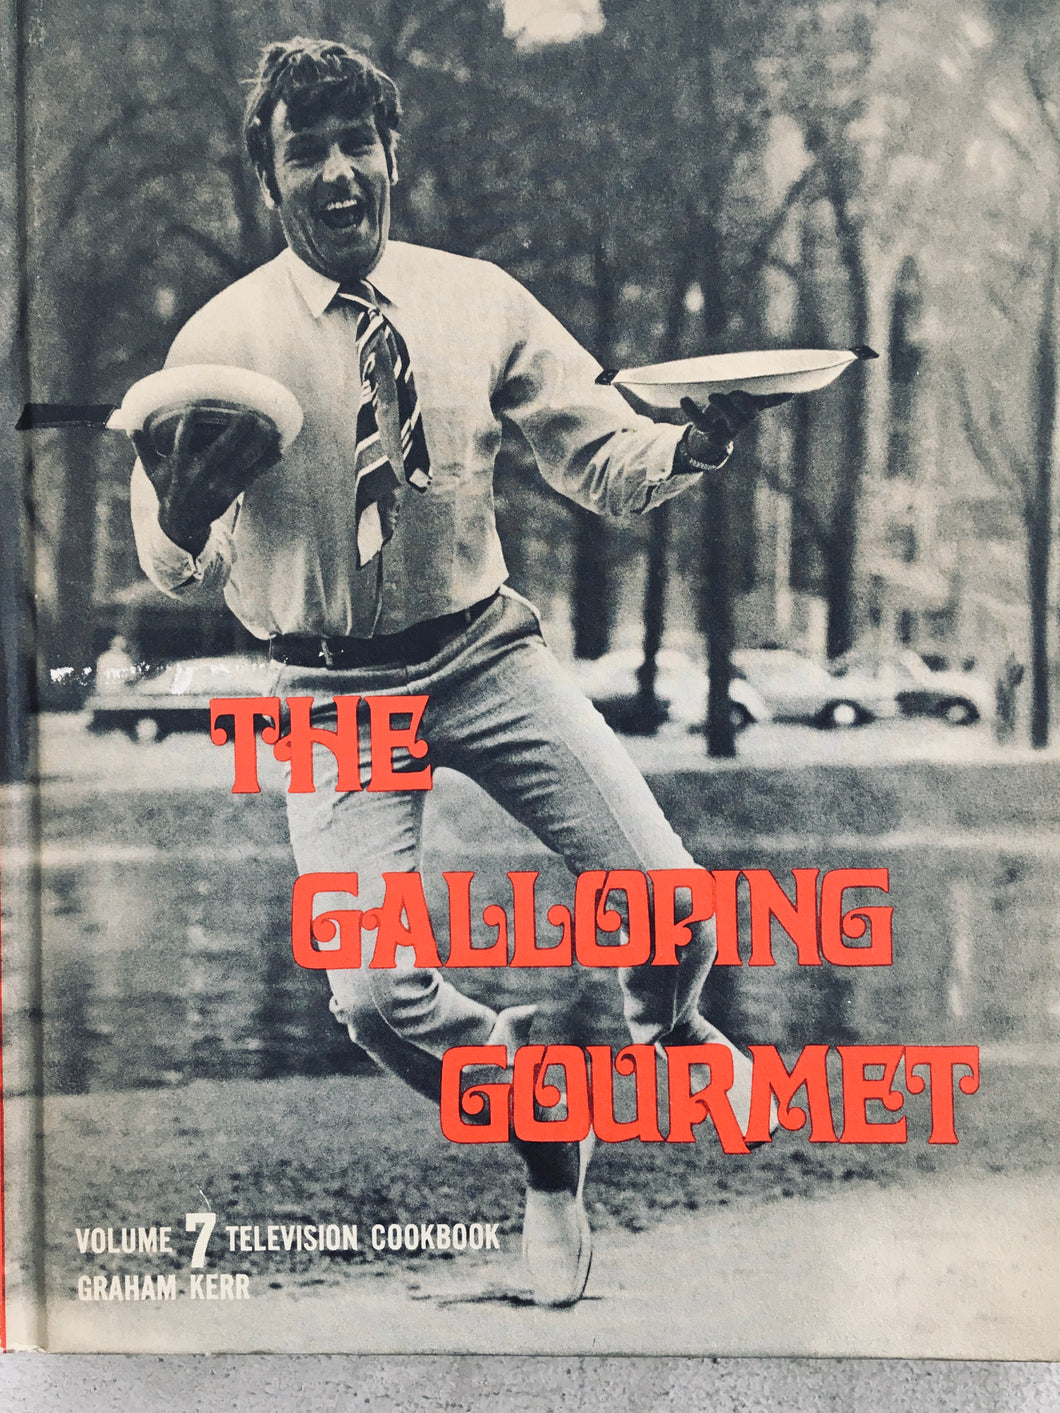 The Galloping Gourmet Television Cookbook Vol 7 by Graham Kerr